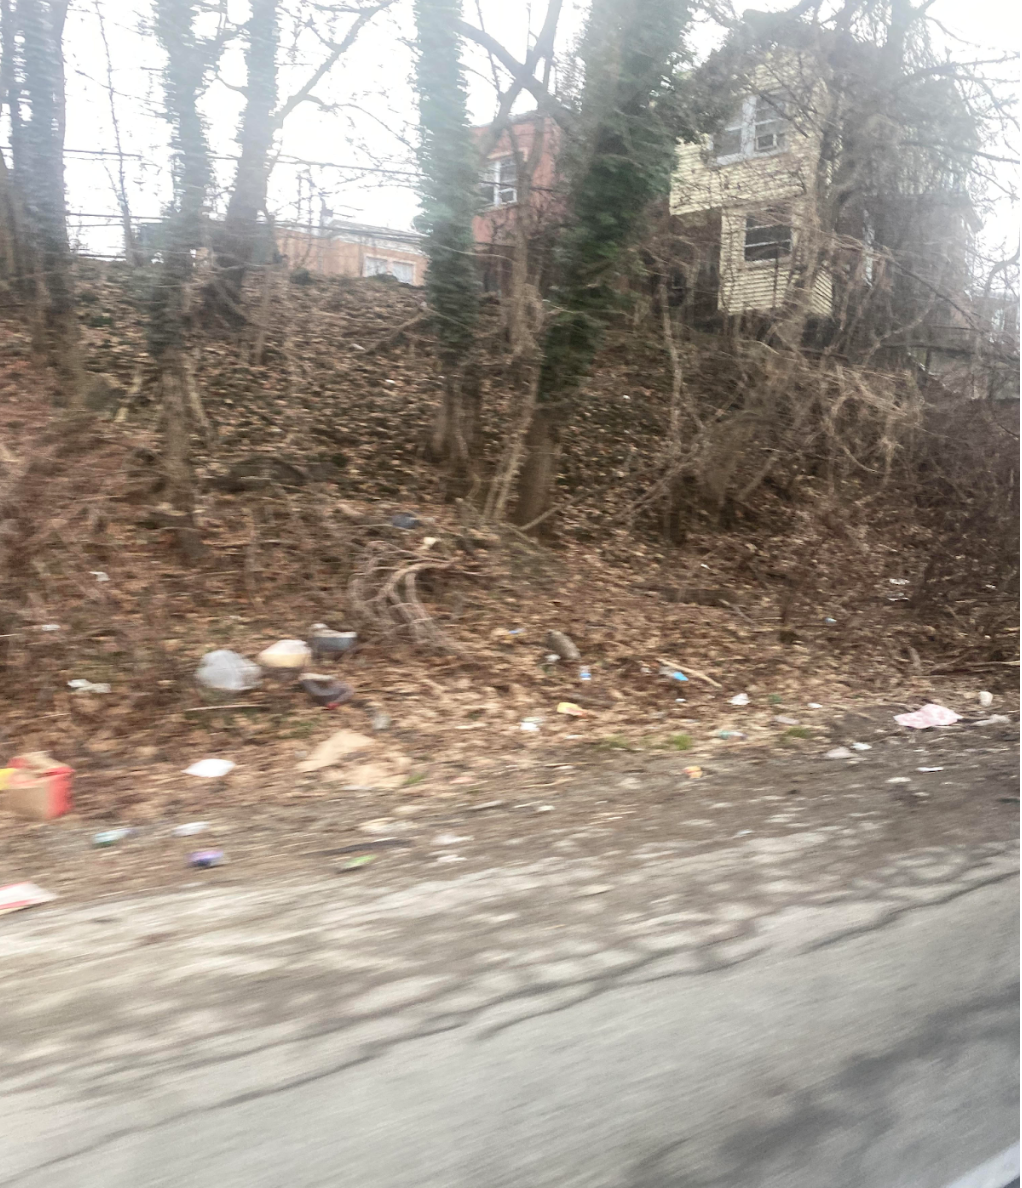 Philly%E2%80%99s+Litter%3A+Help+Clean+Up